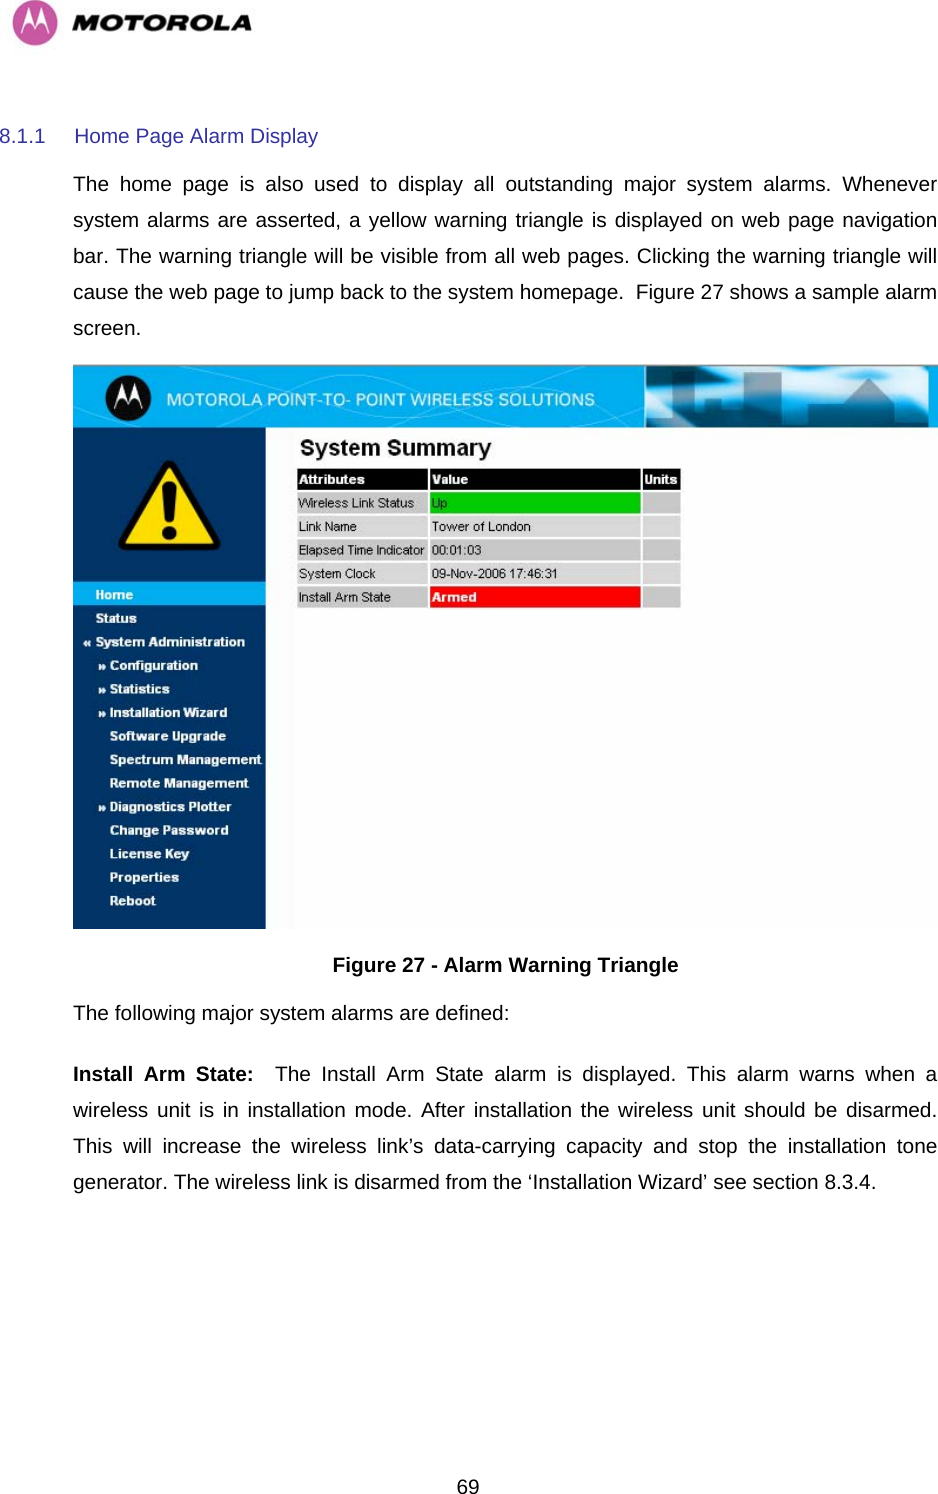   698.1.1  Home Page Alarm Display The home page is also used to display all outstanding major system alarms. Whenever system alarms are asserted, a yellow warning triangle is displayed on web page navigation bar. The warning triangle will be visible from all web pages. Clicking the warning triangle will cause the web page to jump back to the system homepage.  Figure 27 shows a sample alarm screen.  Figure 27 - Alarm Warning Triangle The following major system alarms are defined:  Install Arm State:  The Install Arm State alarm is displayed. This alarm warns when a wireless unit is in installation mode. After installation the wireless unit should be disarmed. This will increase the wireless link’s data-carrying capacity and stop the installation tone generator. The wireless link is disarmed from the ‘Installation Wizard’ see section 8.3.4. 